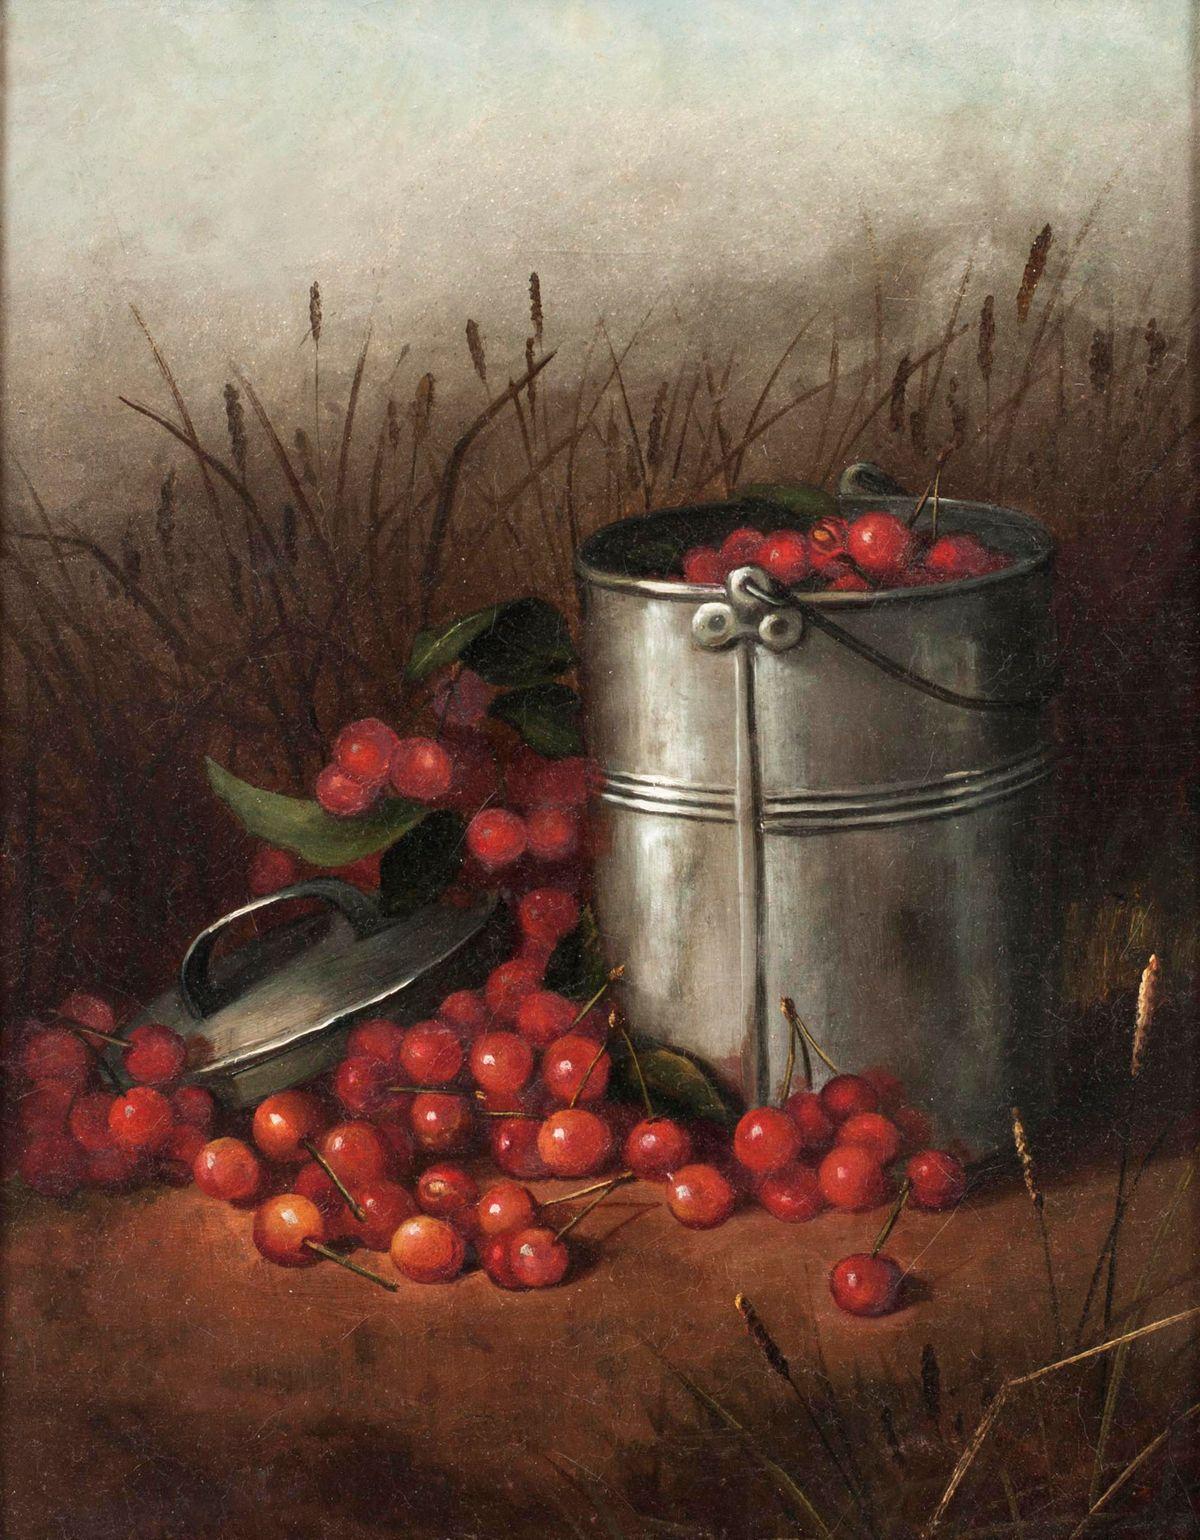 still life painting of cherries by Irene E. Parmelle (Parmely)

IRENE E. PARMELLE (PARMELY) (d. 1939)
Still Life (The Cherry Pail)
Oil on canvas
18 x 14 inches